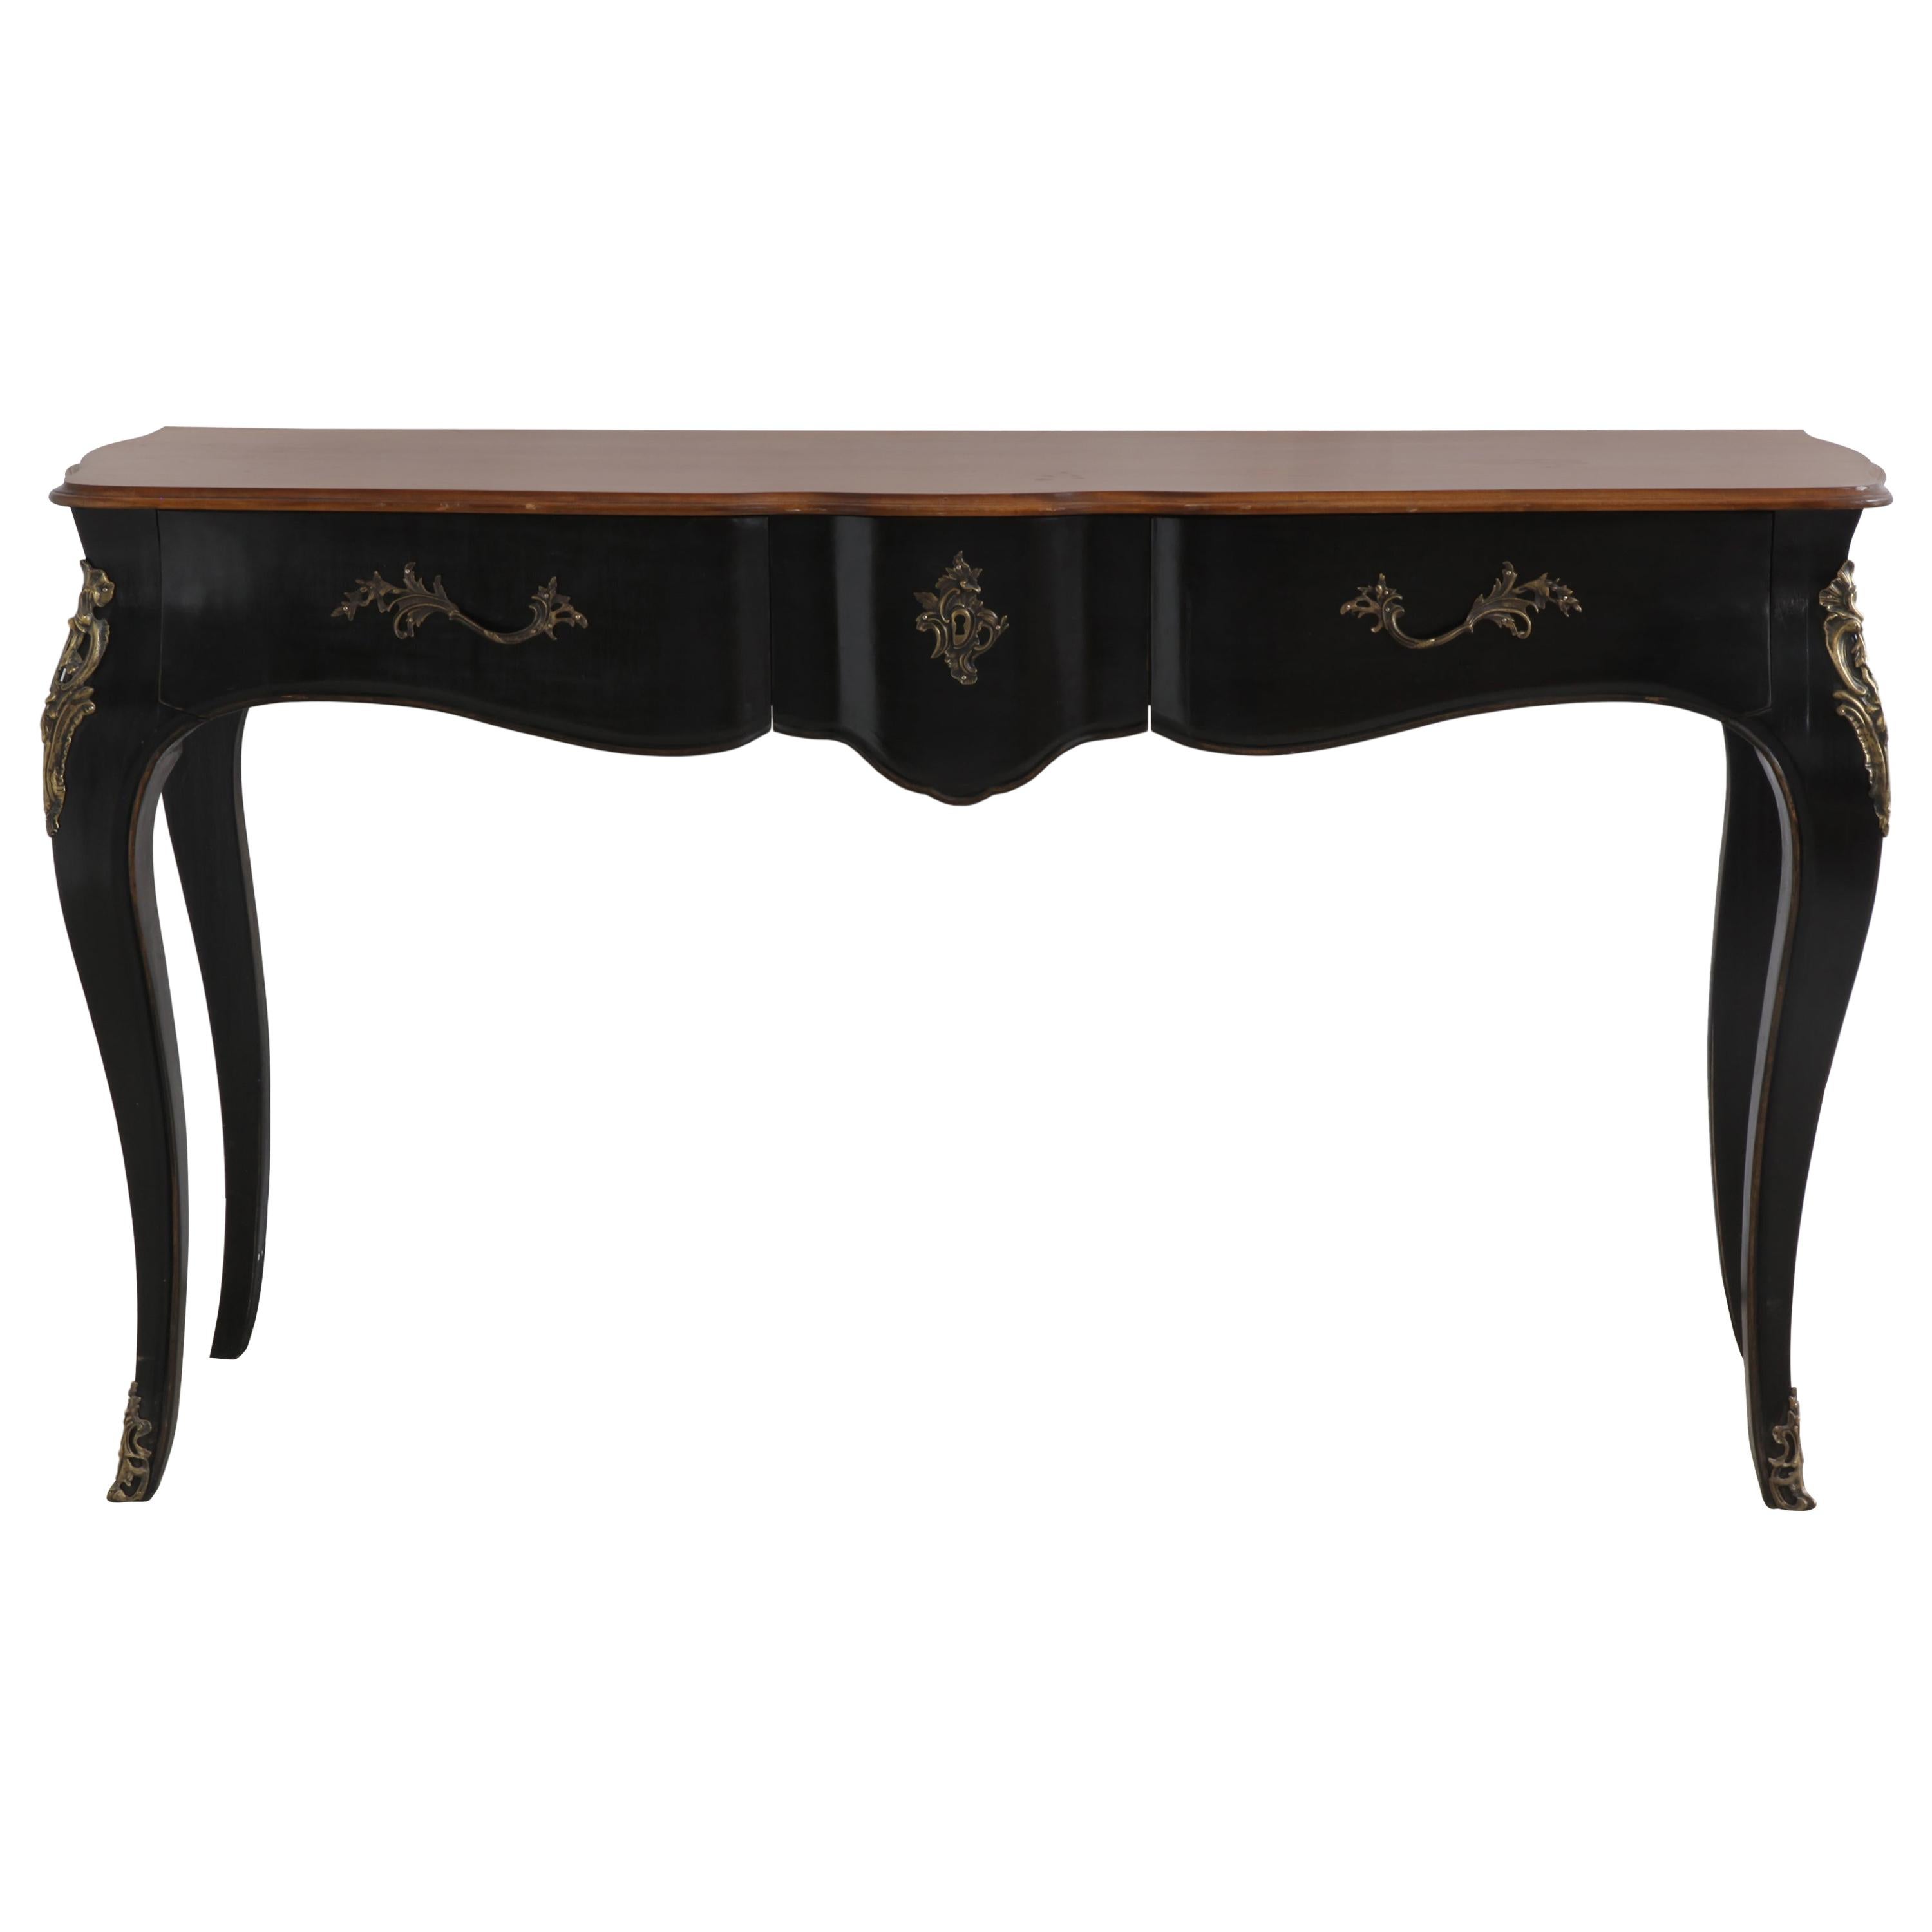 Louis XV Console Black Lacquered with Natural Wood Top